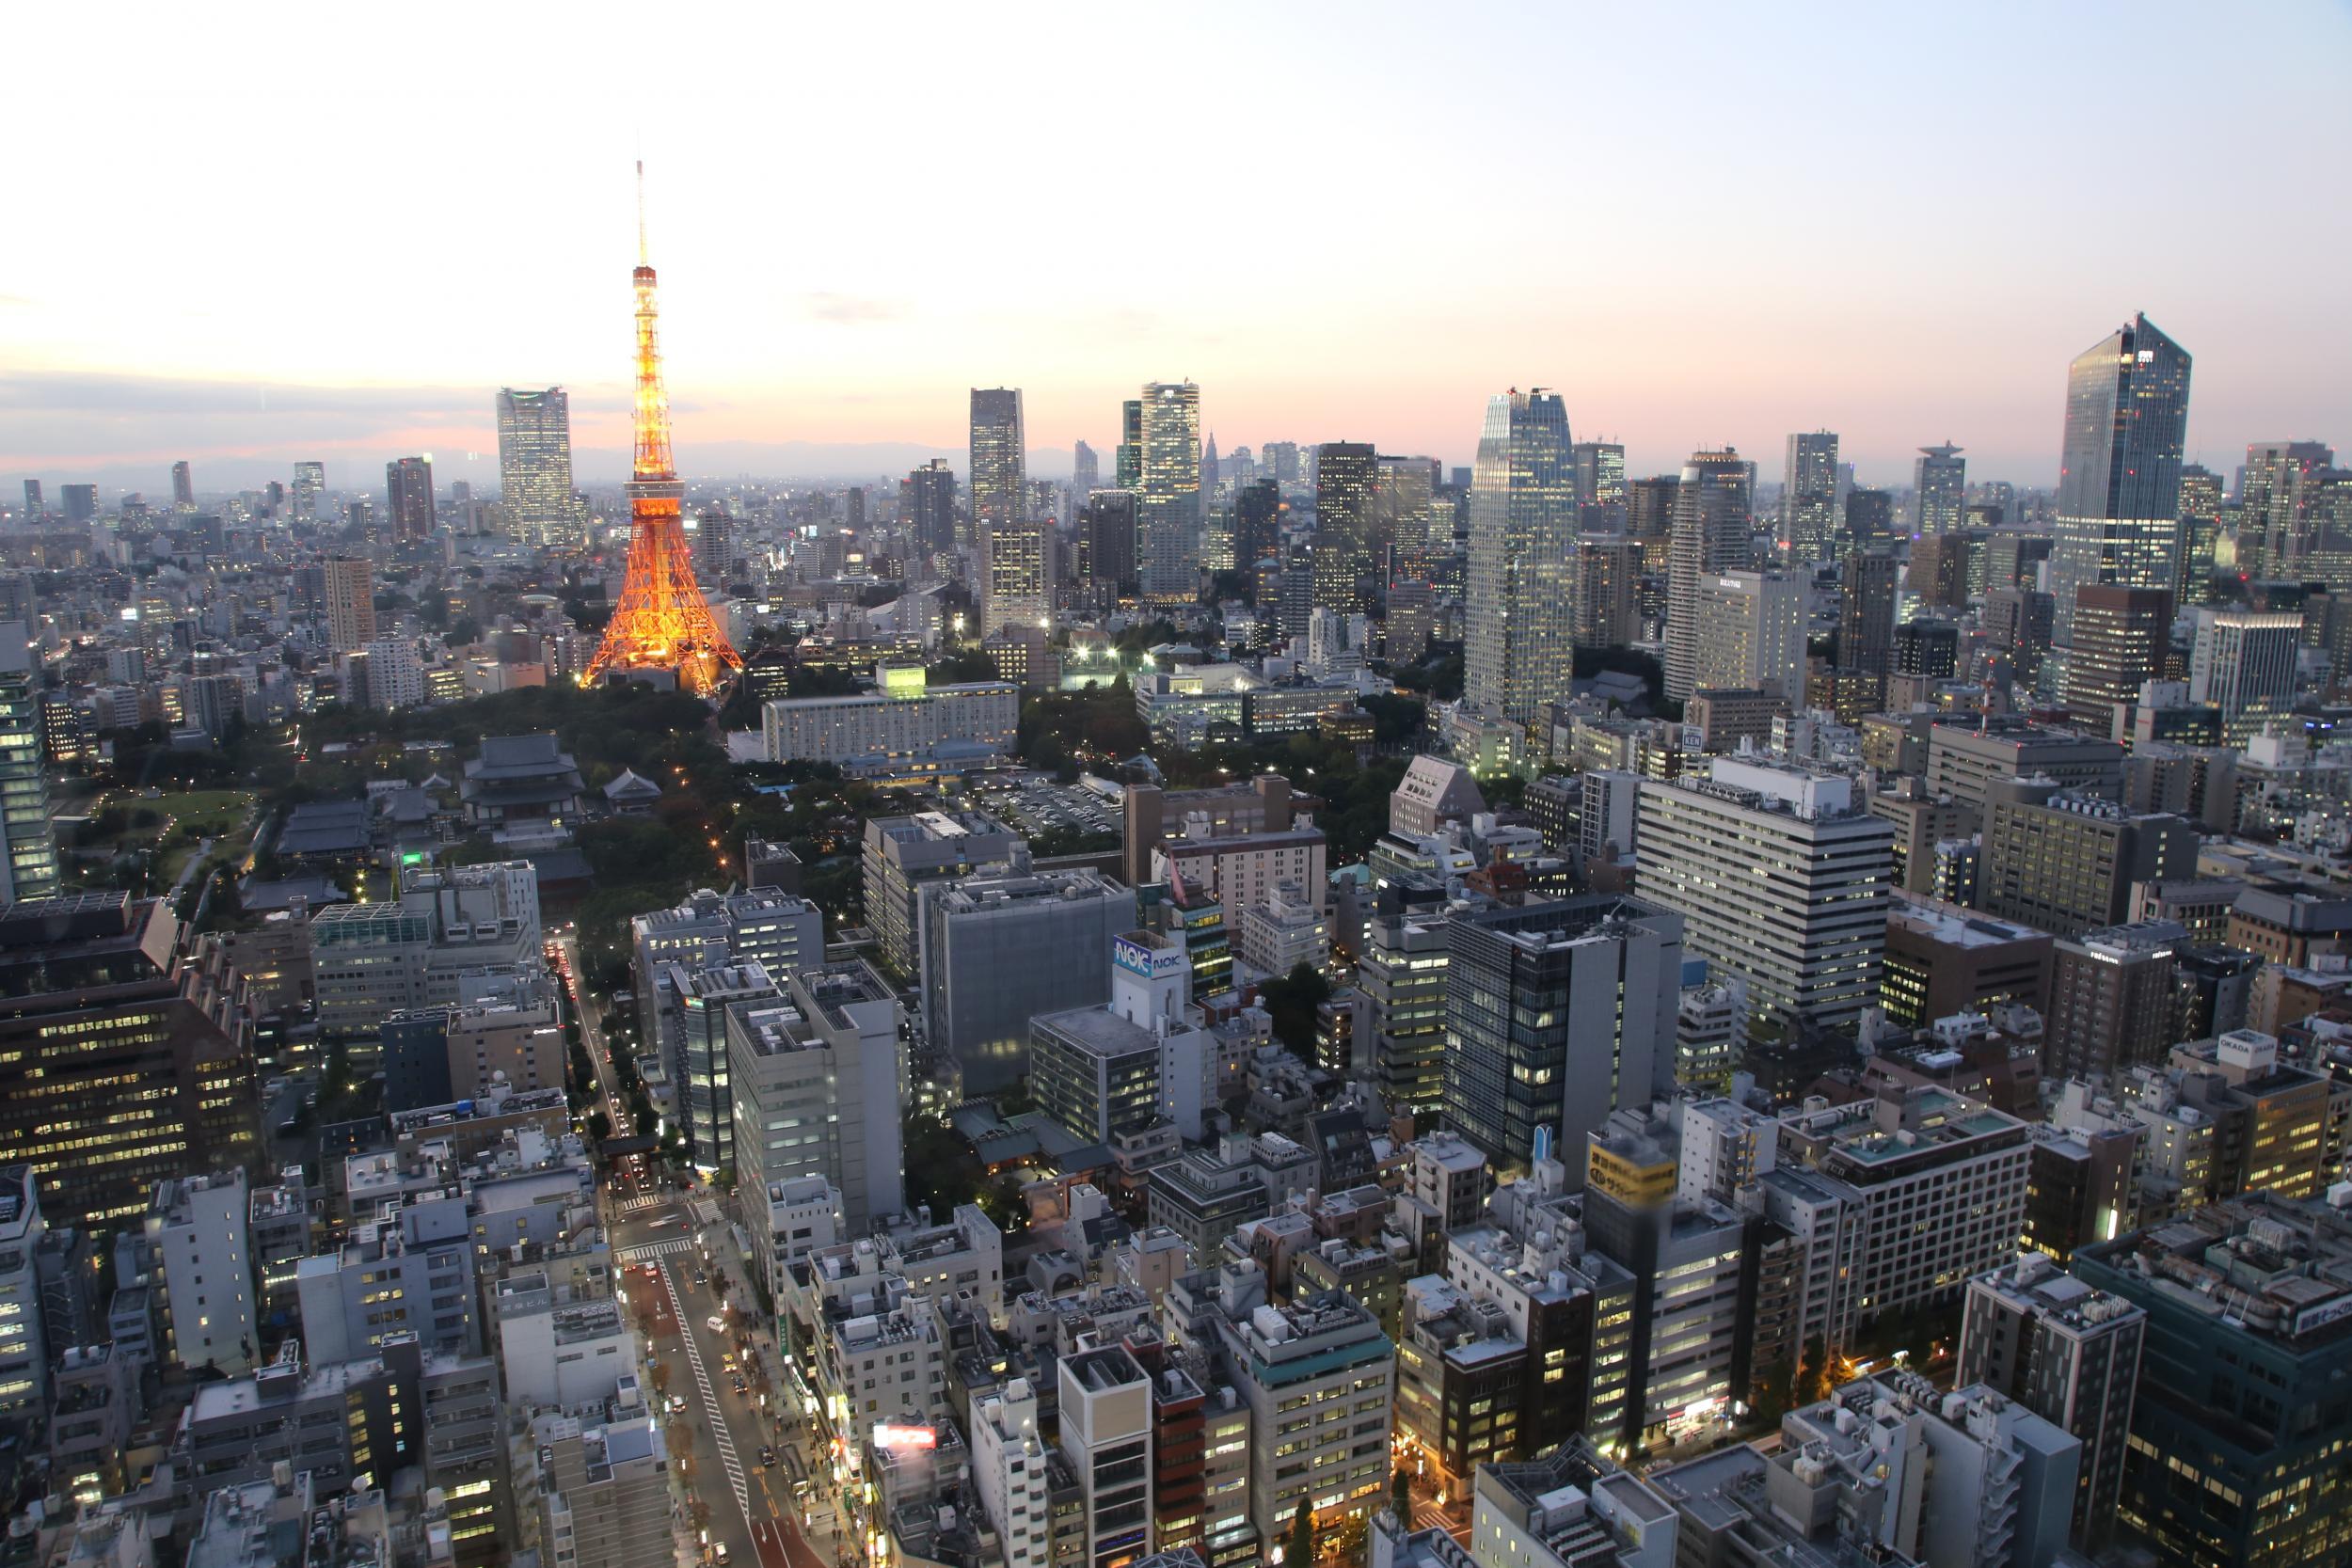 The Tokyo Tower is a highlight of the city’s busy skyline